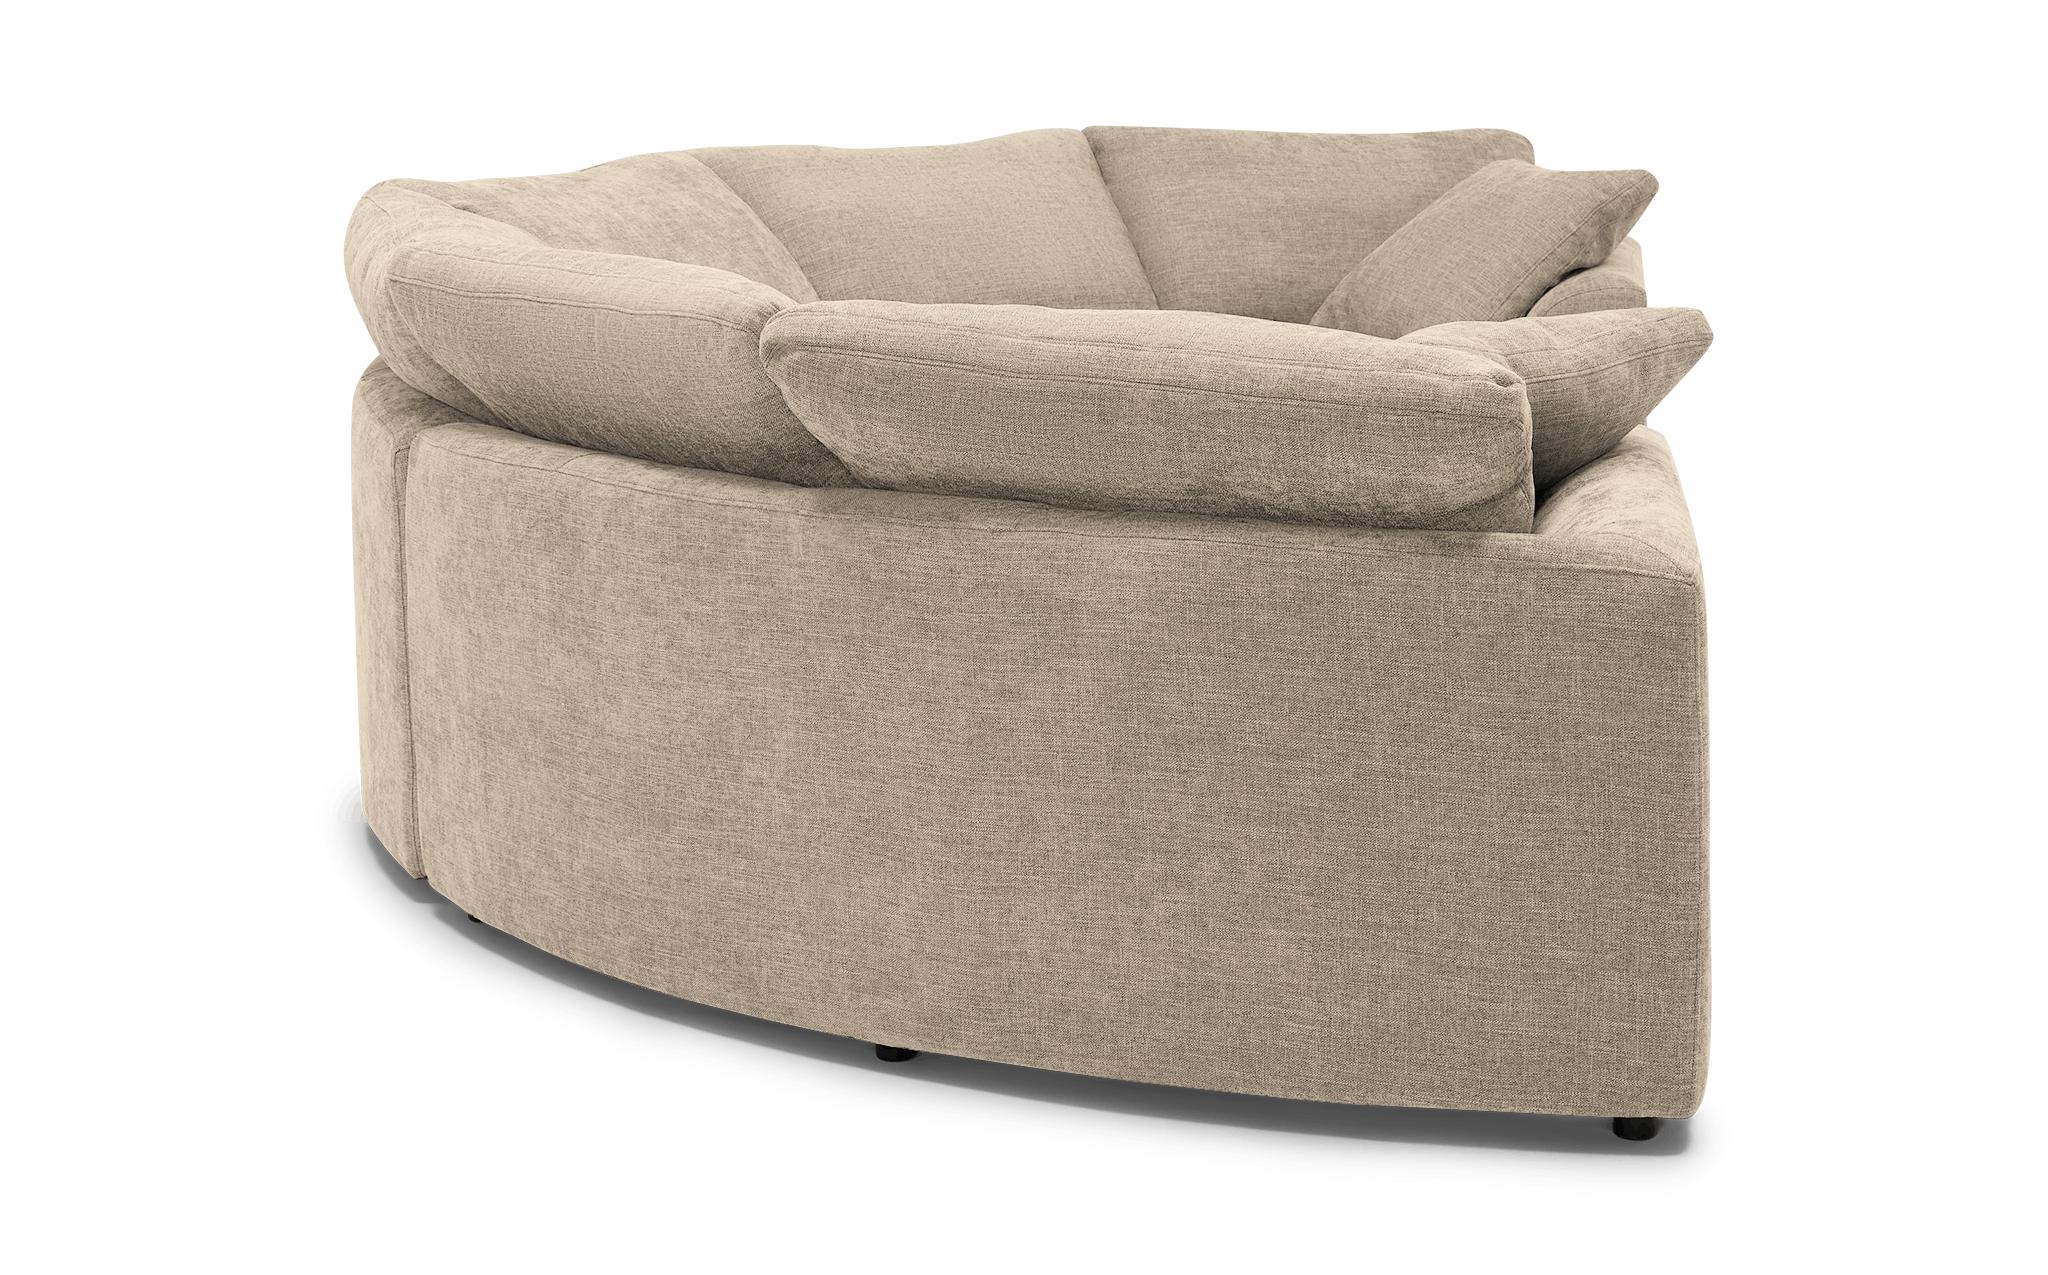 Beige/White Bryant Mid Century Modern Semicircle Sectional (3 Piece) - Cody Sandstone - Image 2